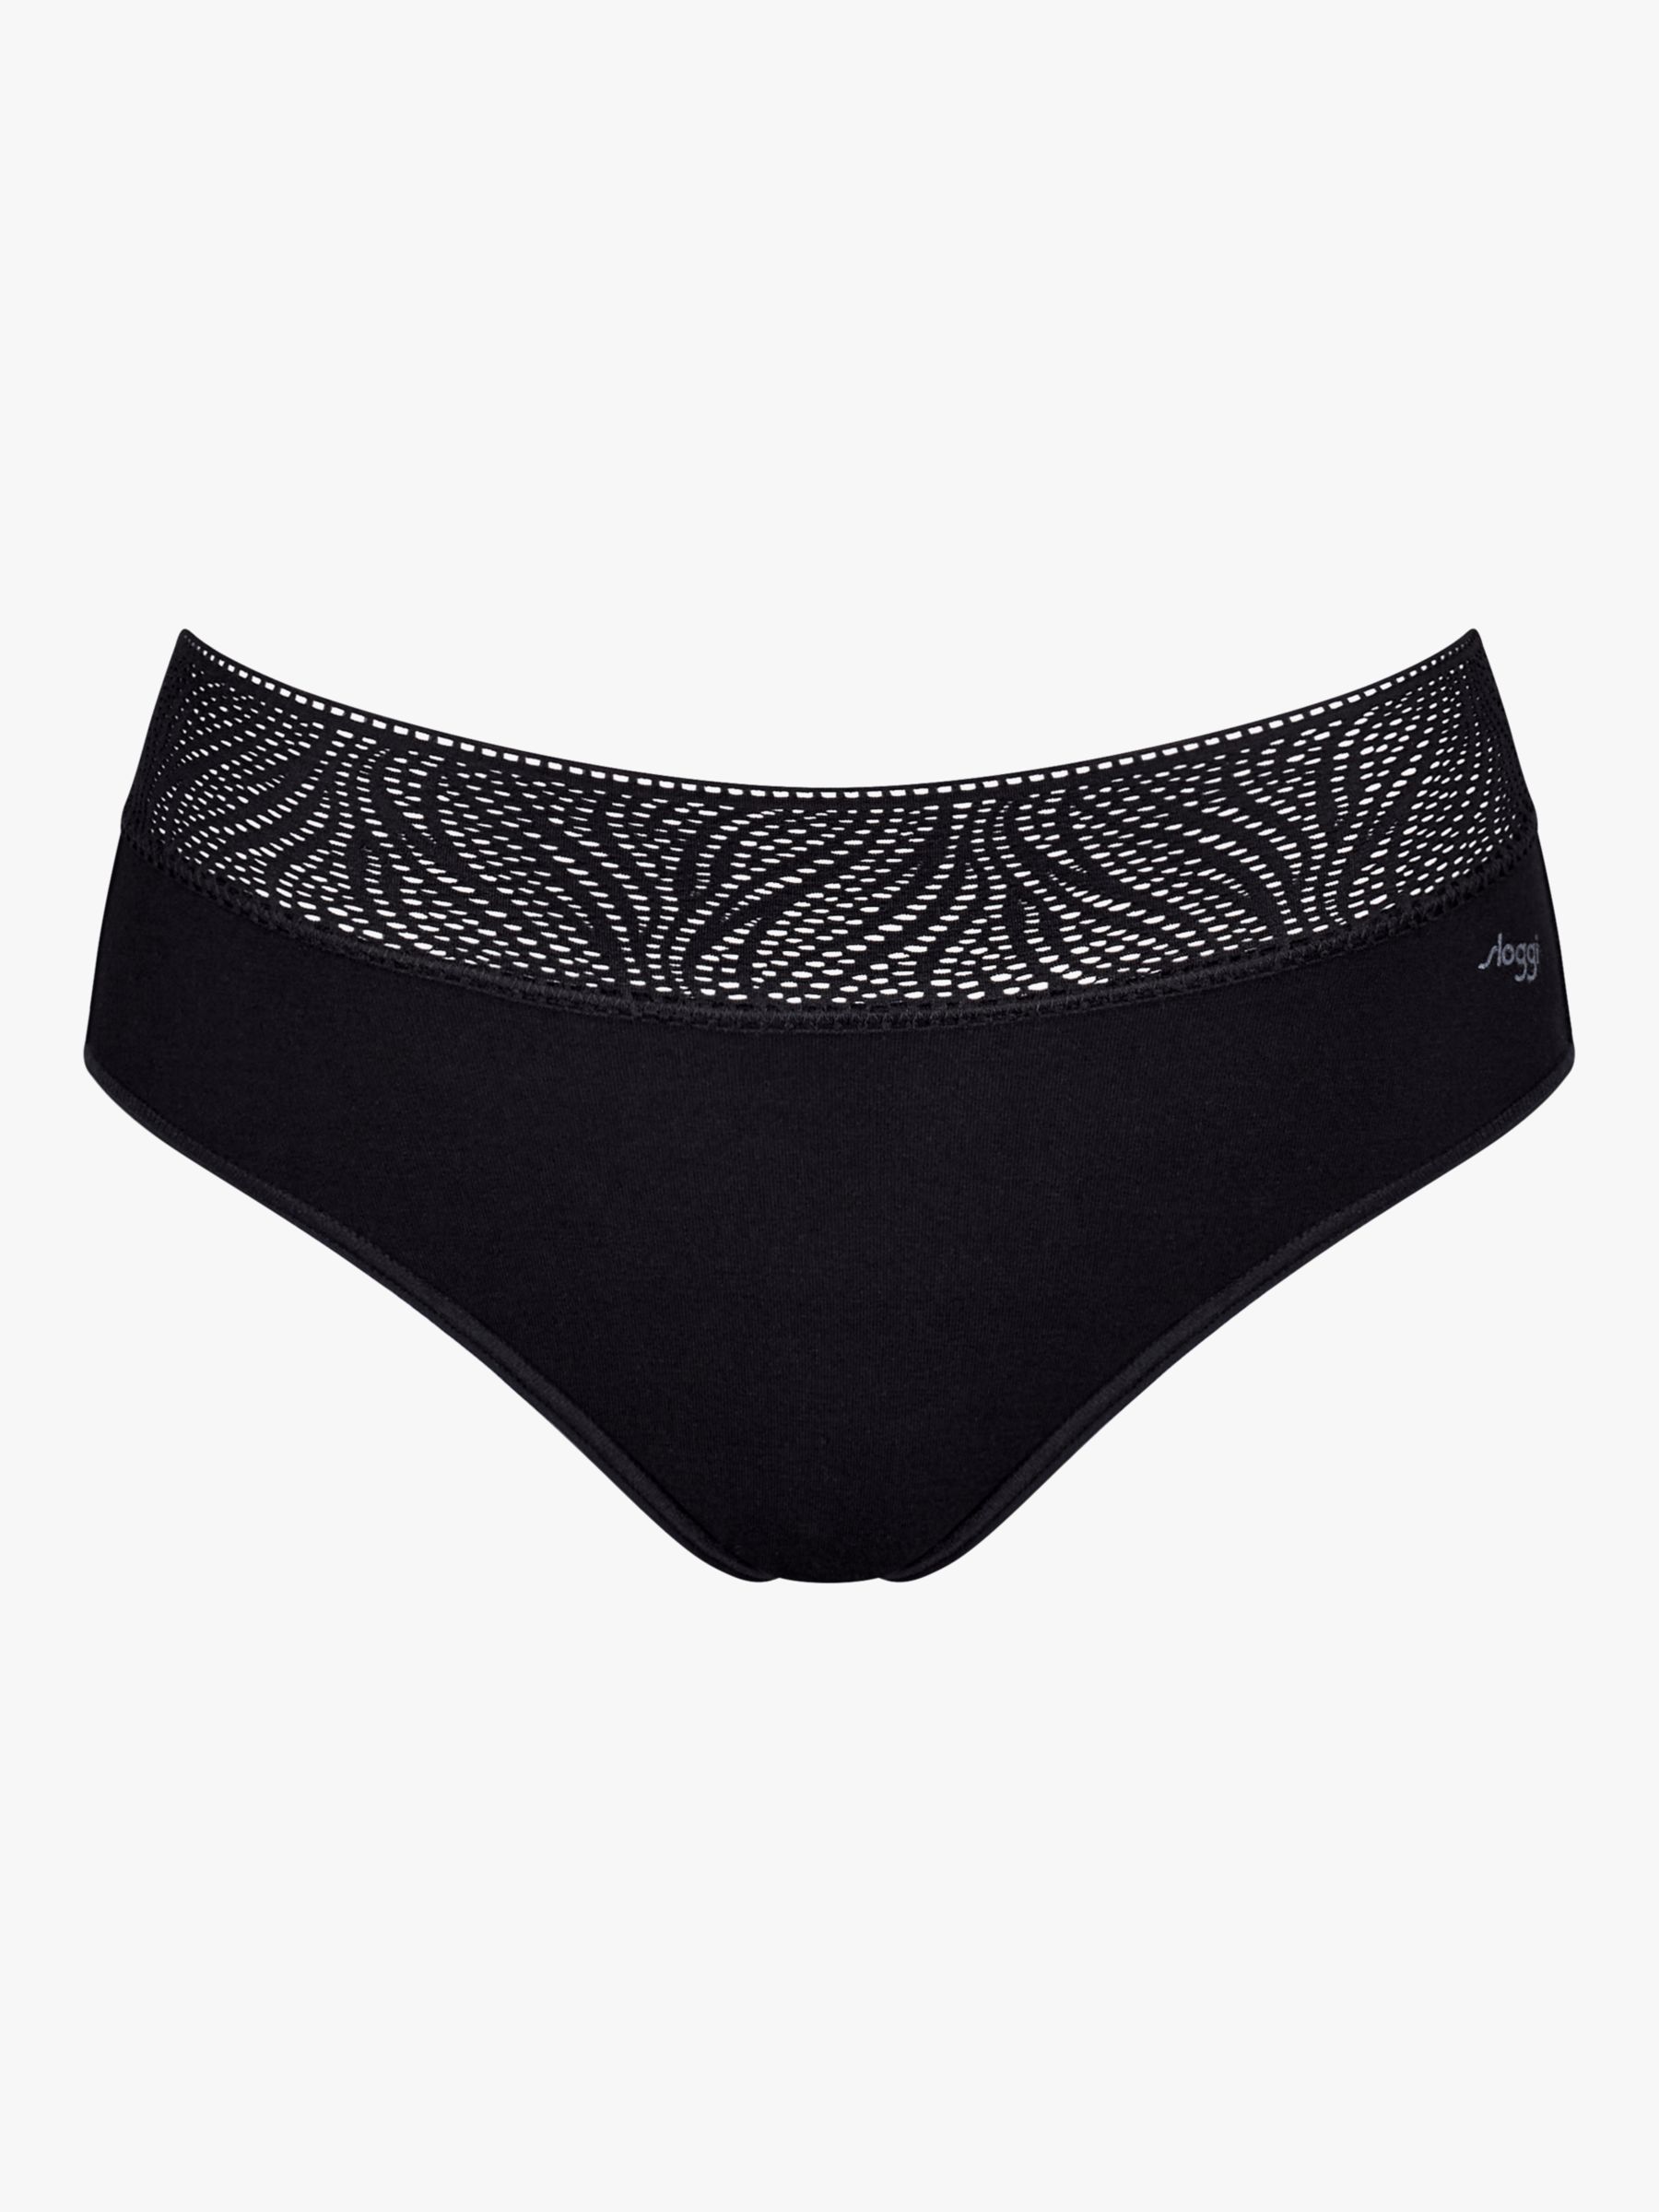 sloggi High Absorbency Hipster Period Knickers, Pack of 2, Black